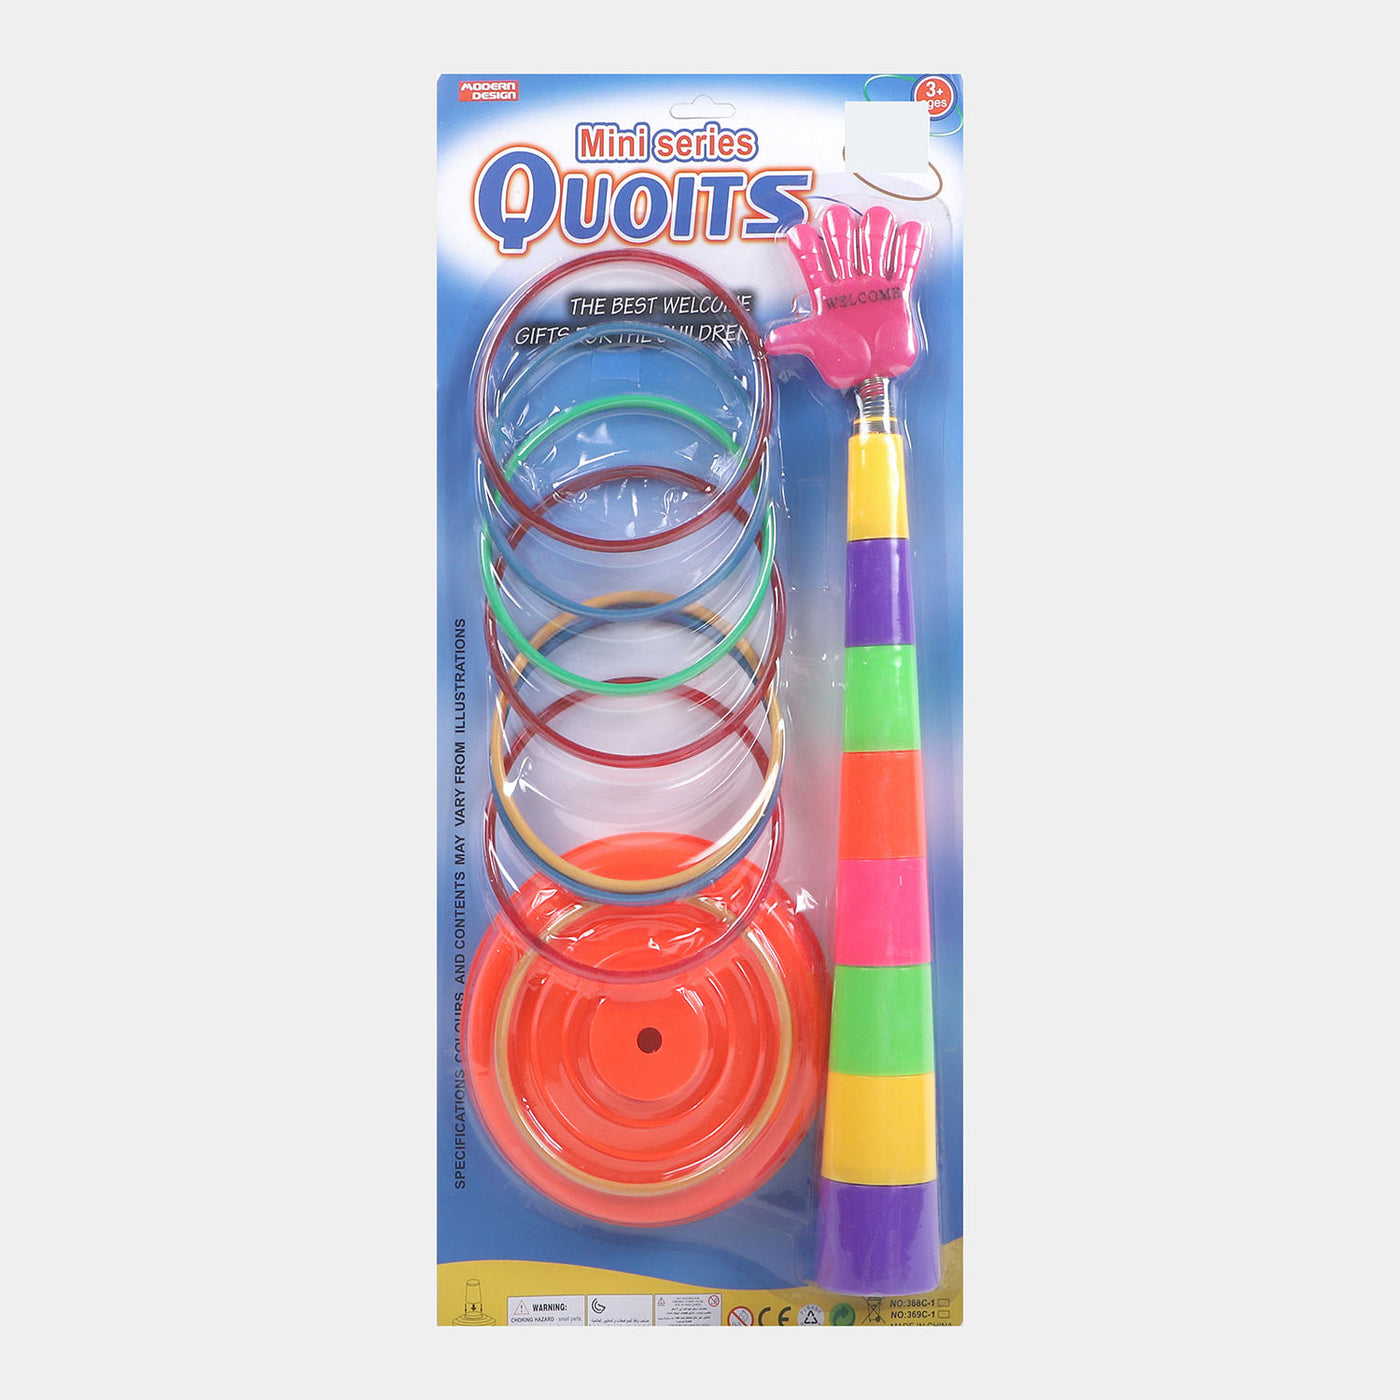 Mini Series Quoits Play Set Toy, Kids Arena Plastic Ring Toss